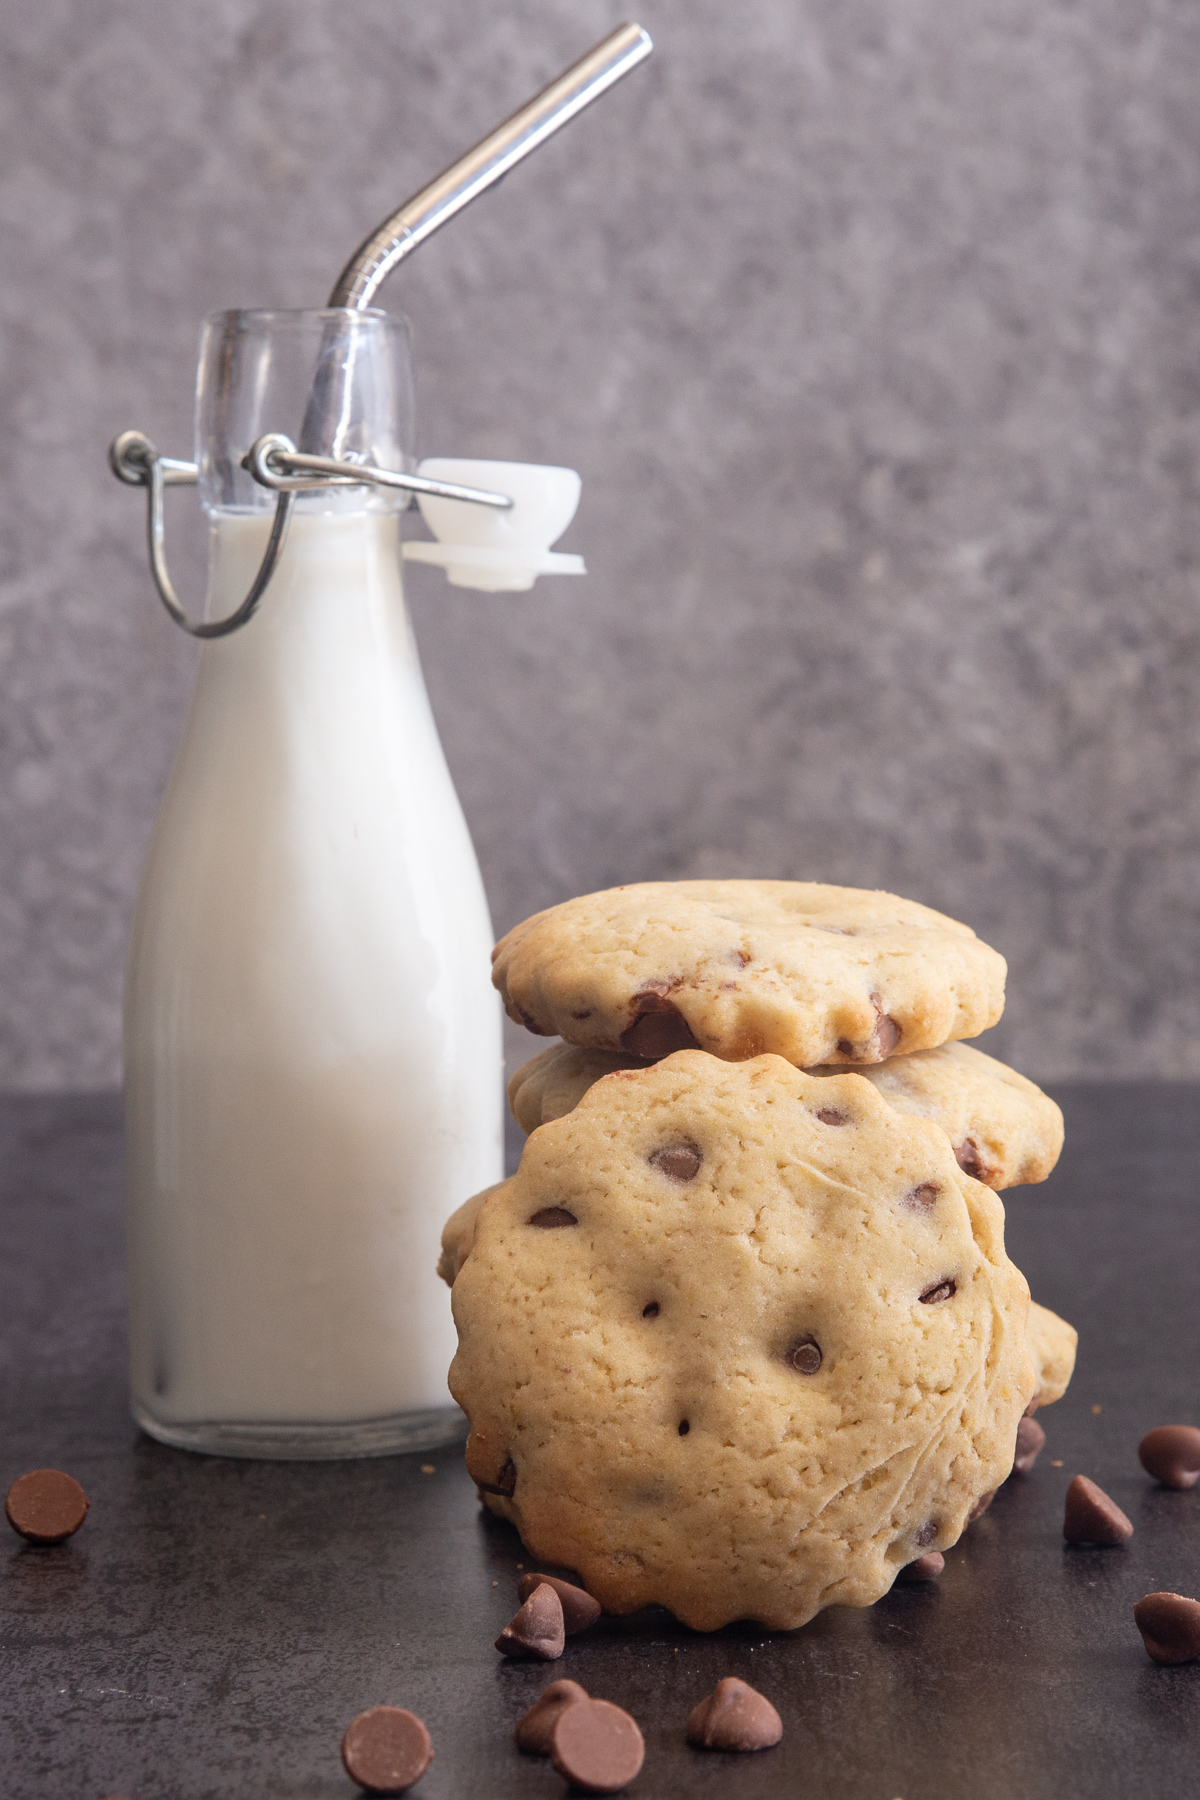 Cookies stacked with one leaning and a small bottle of milk with a silver straw.